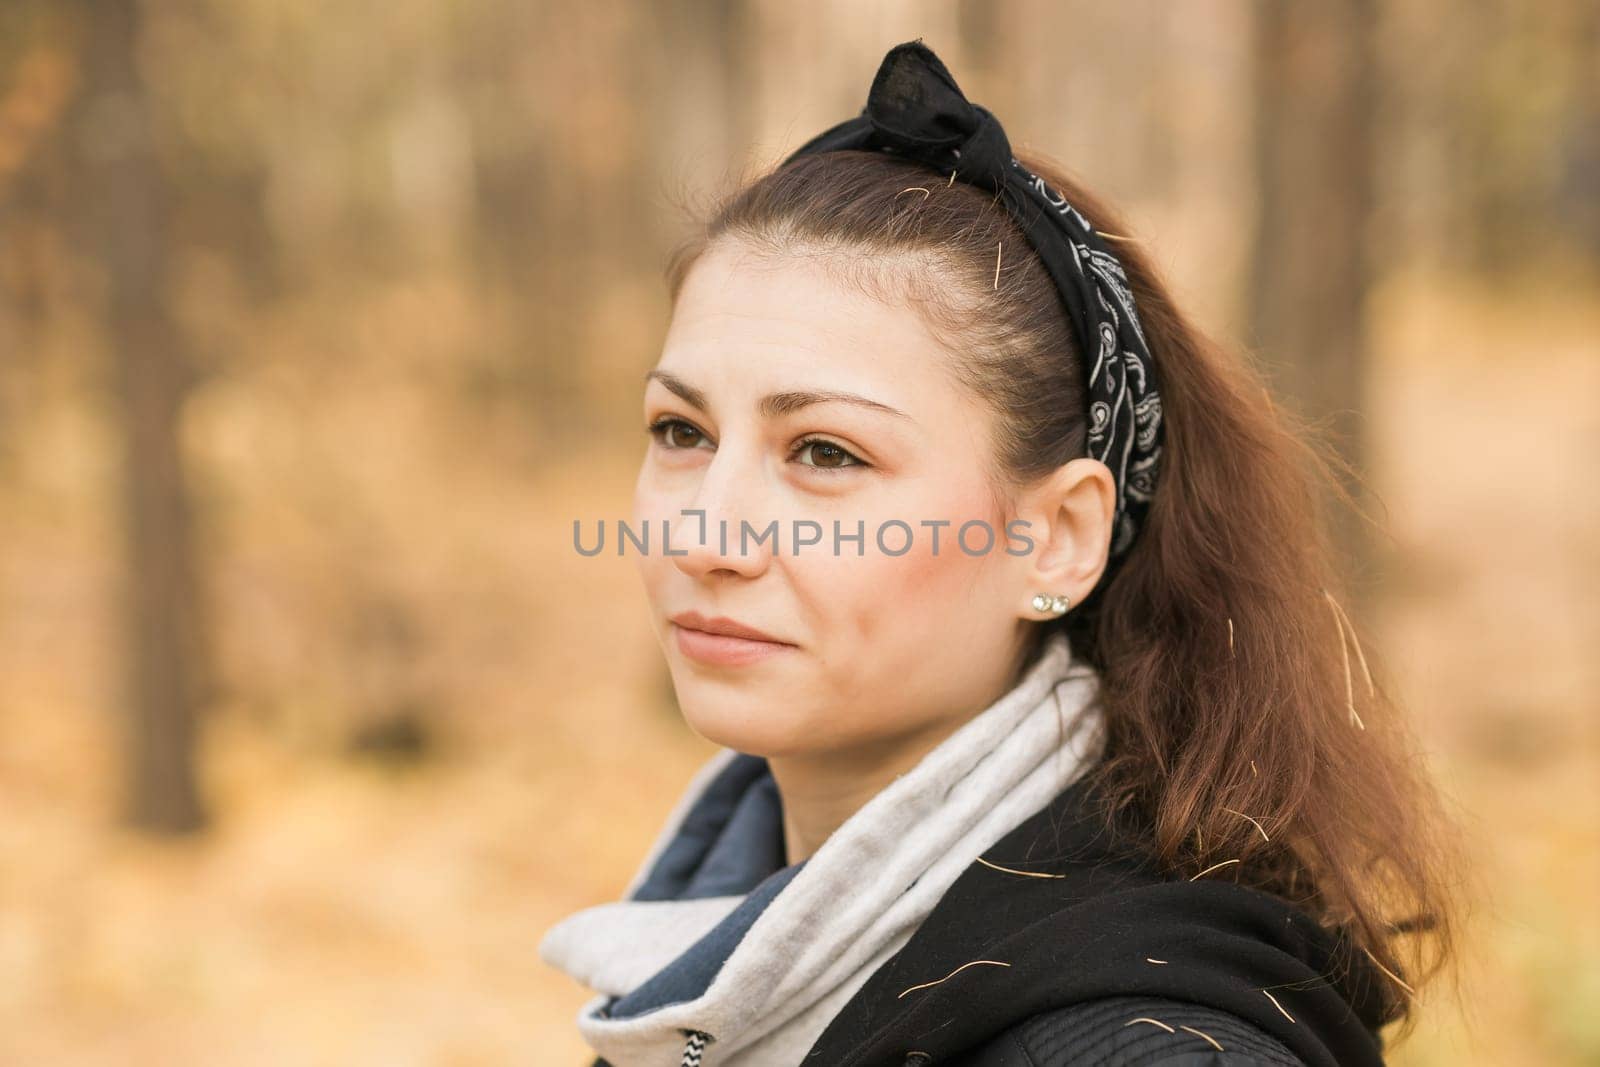 Outdoor atmospheric lifestyle portrait of young beautiful young woman copy space. Warm autumn fall season. Millennial generation and youth by Satura86